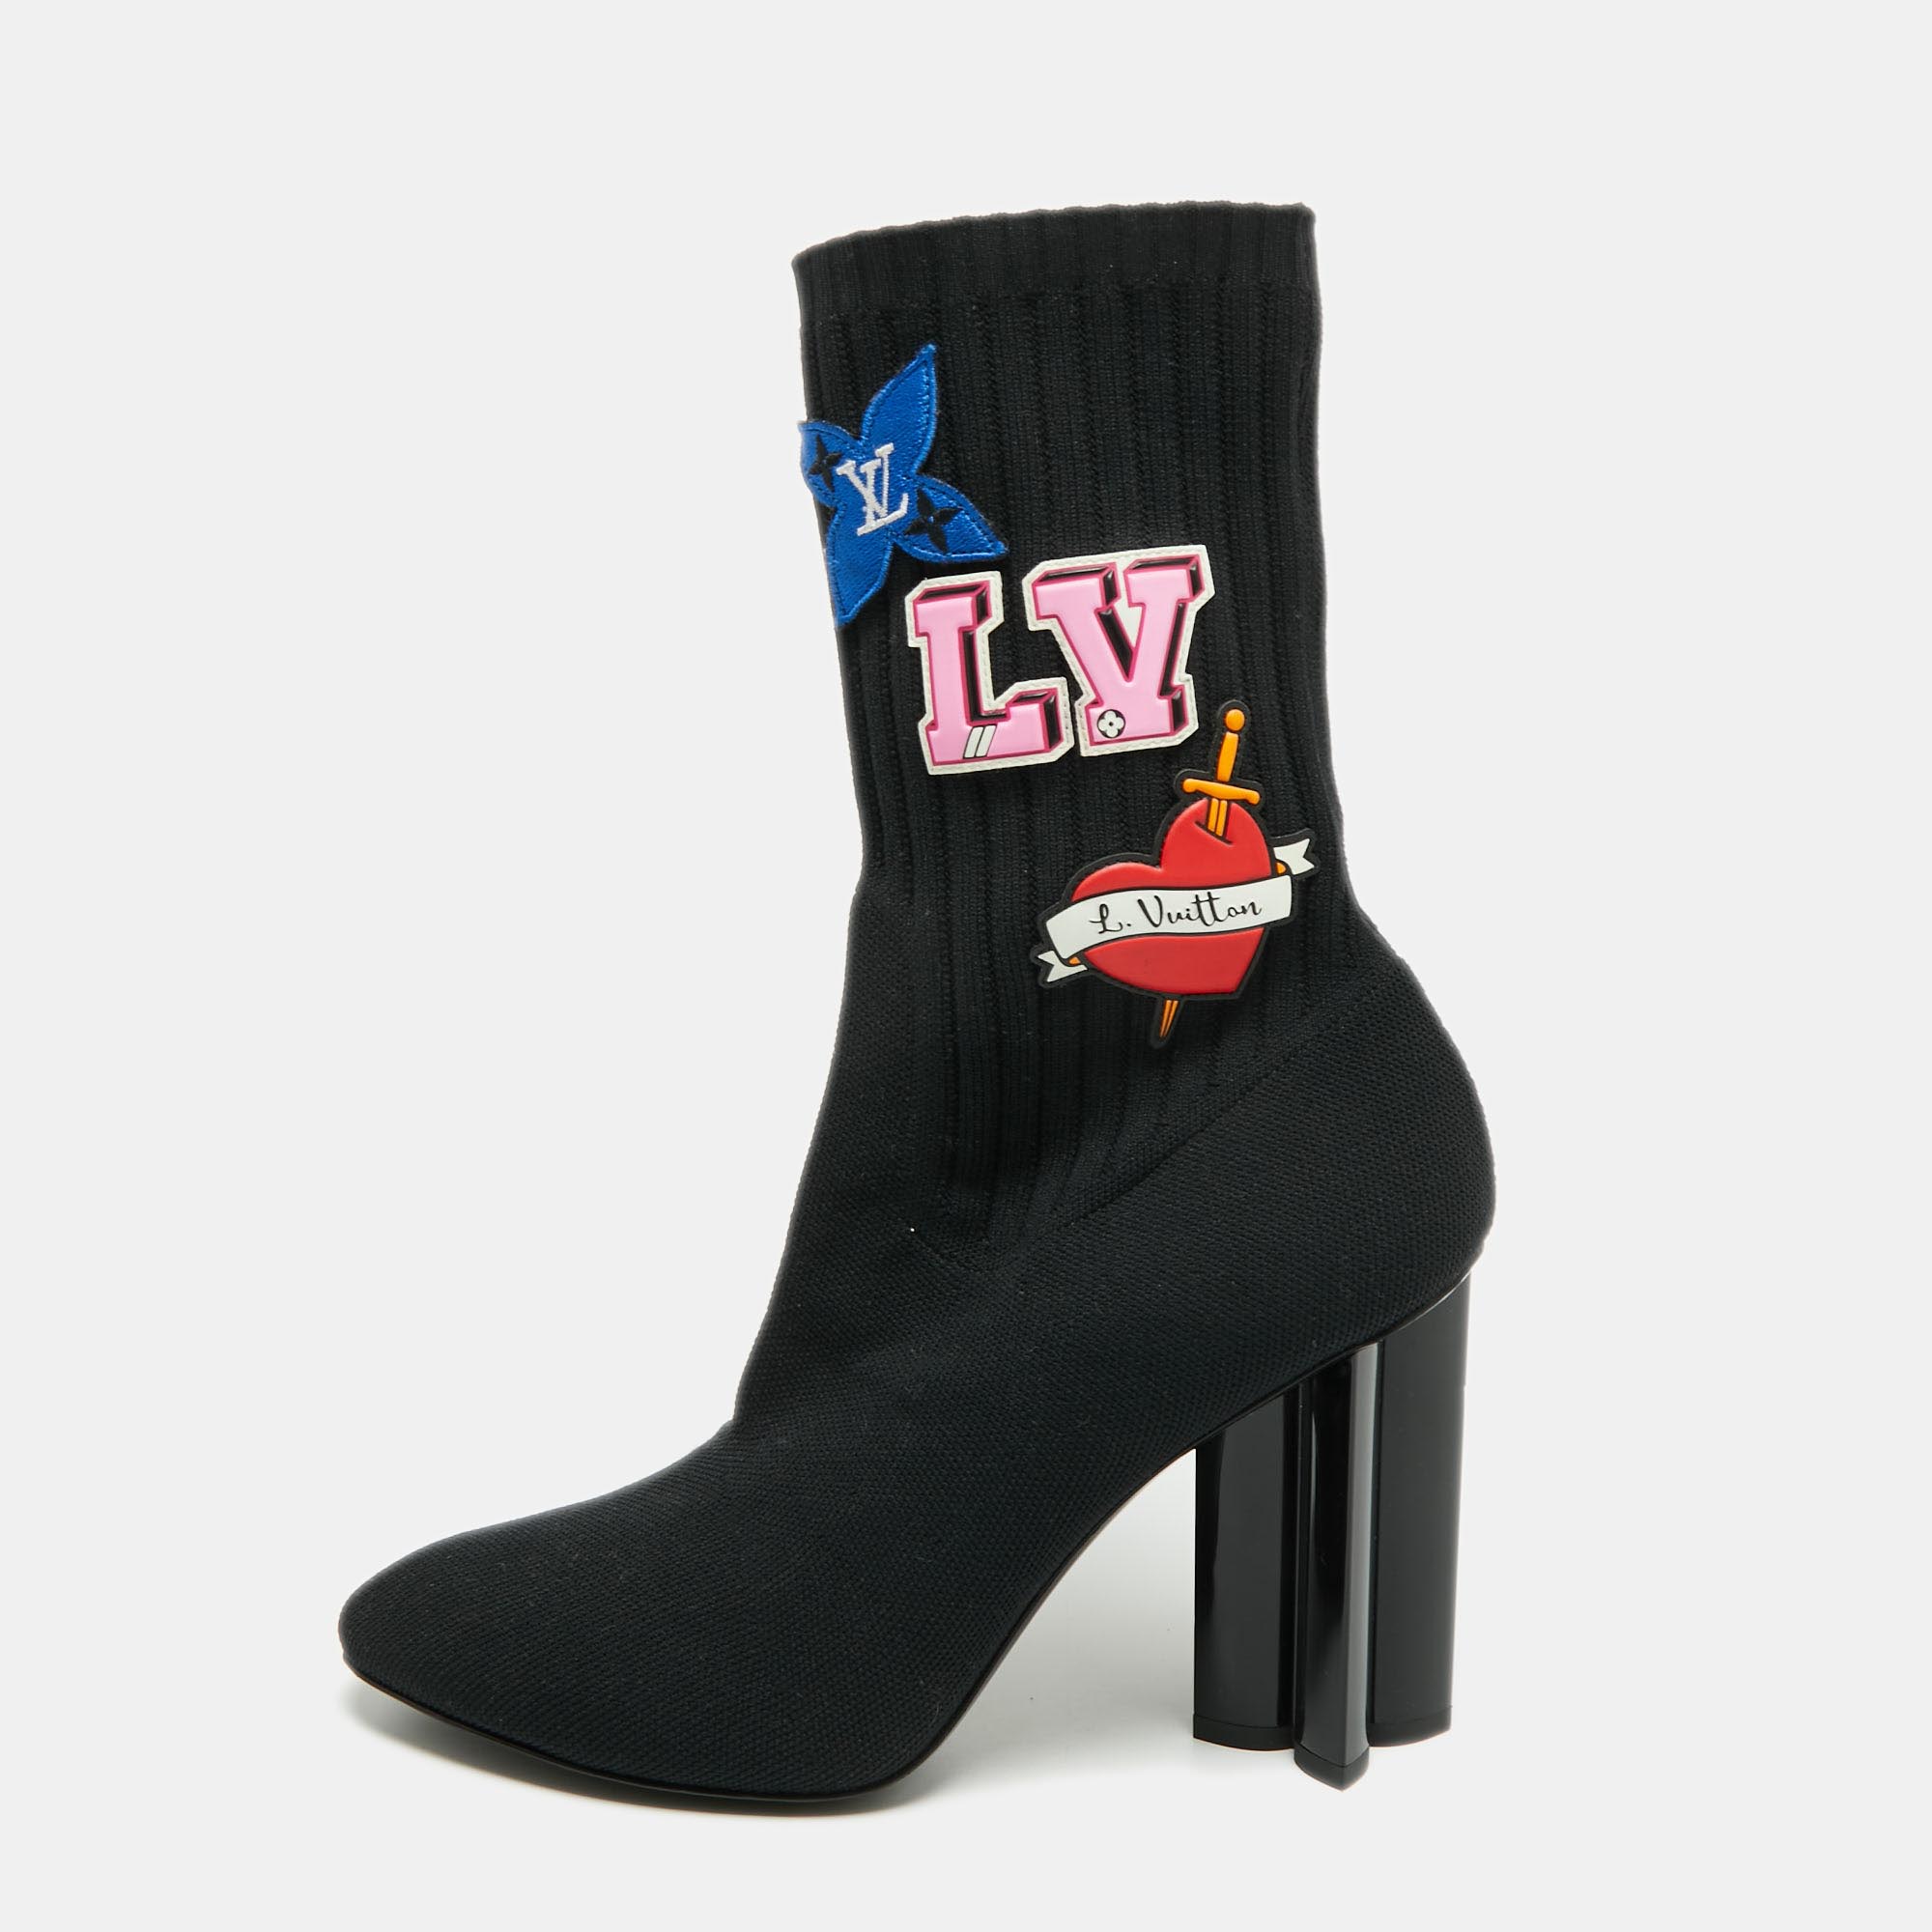 Pre-owned Louis Vuitton Black Knit Fabric Lv Black Heart Sock Ankle Boots Size 38.5